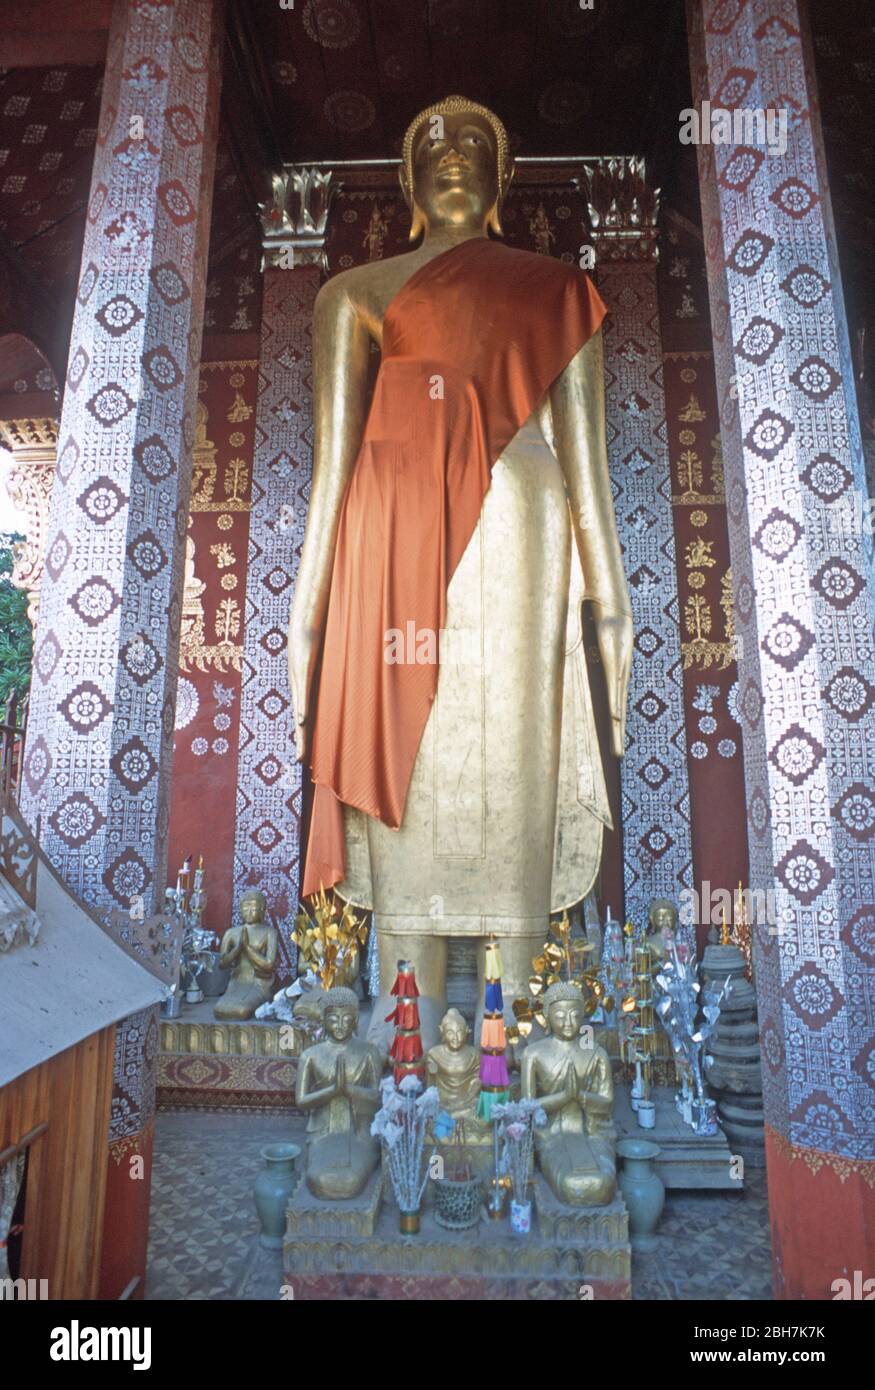 Gold statue of the Buddha, draped with an orange sash, in an elaborately decorated temple or wat in Luang Prabang, Laos, SE Asia. The town of Luang Prabang is a UNESCO World Heritage Site. Stock Photo